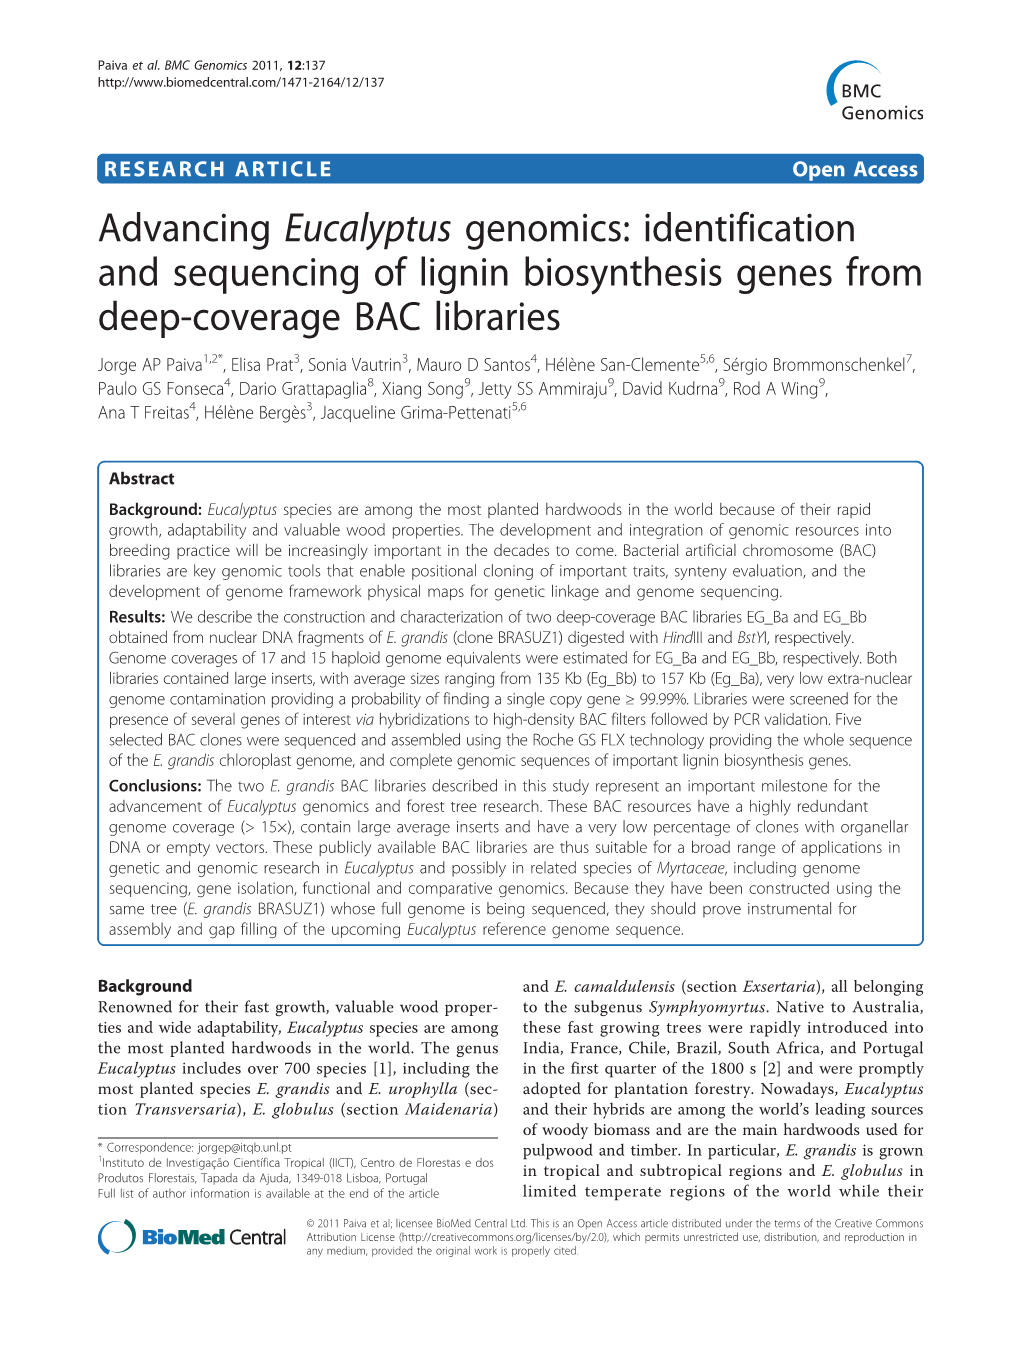 Identification and Sequencing of Lignin Biosynthesis